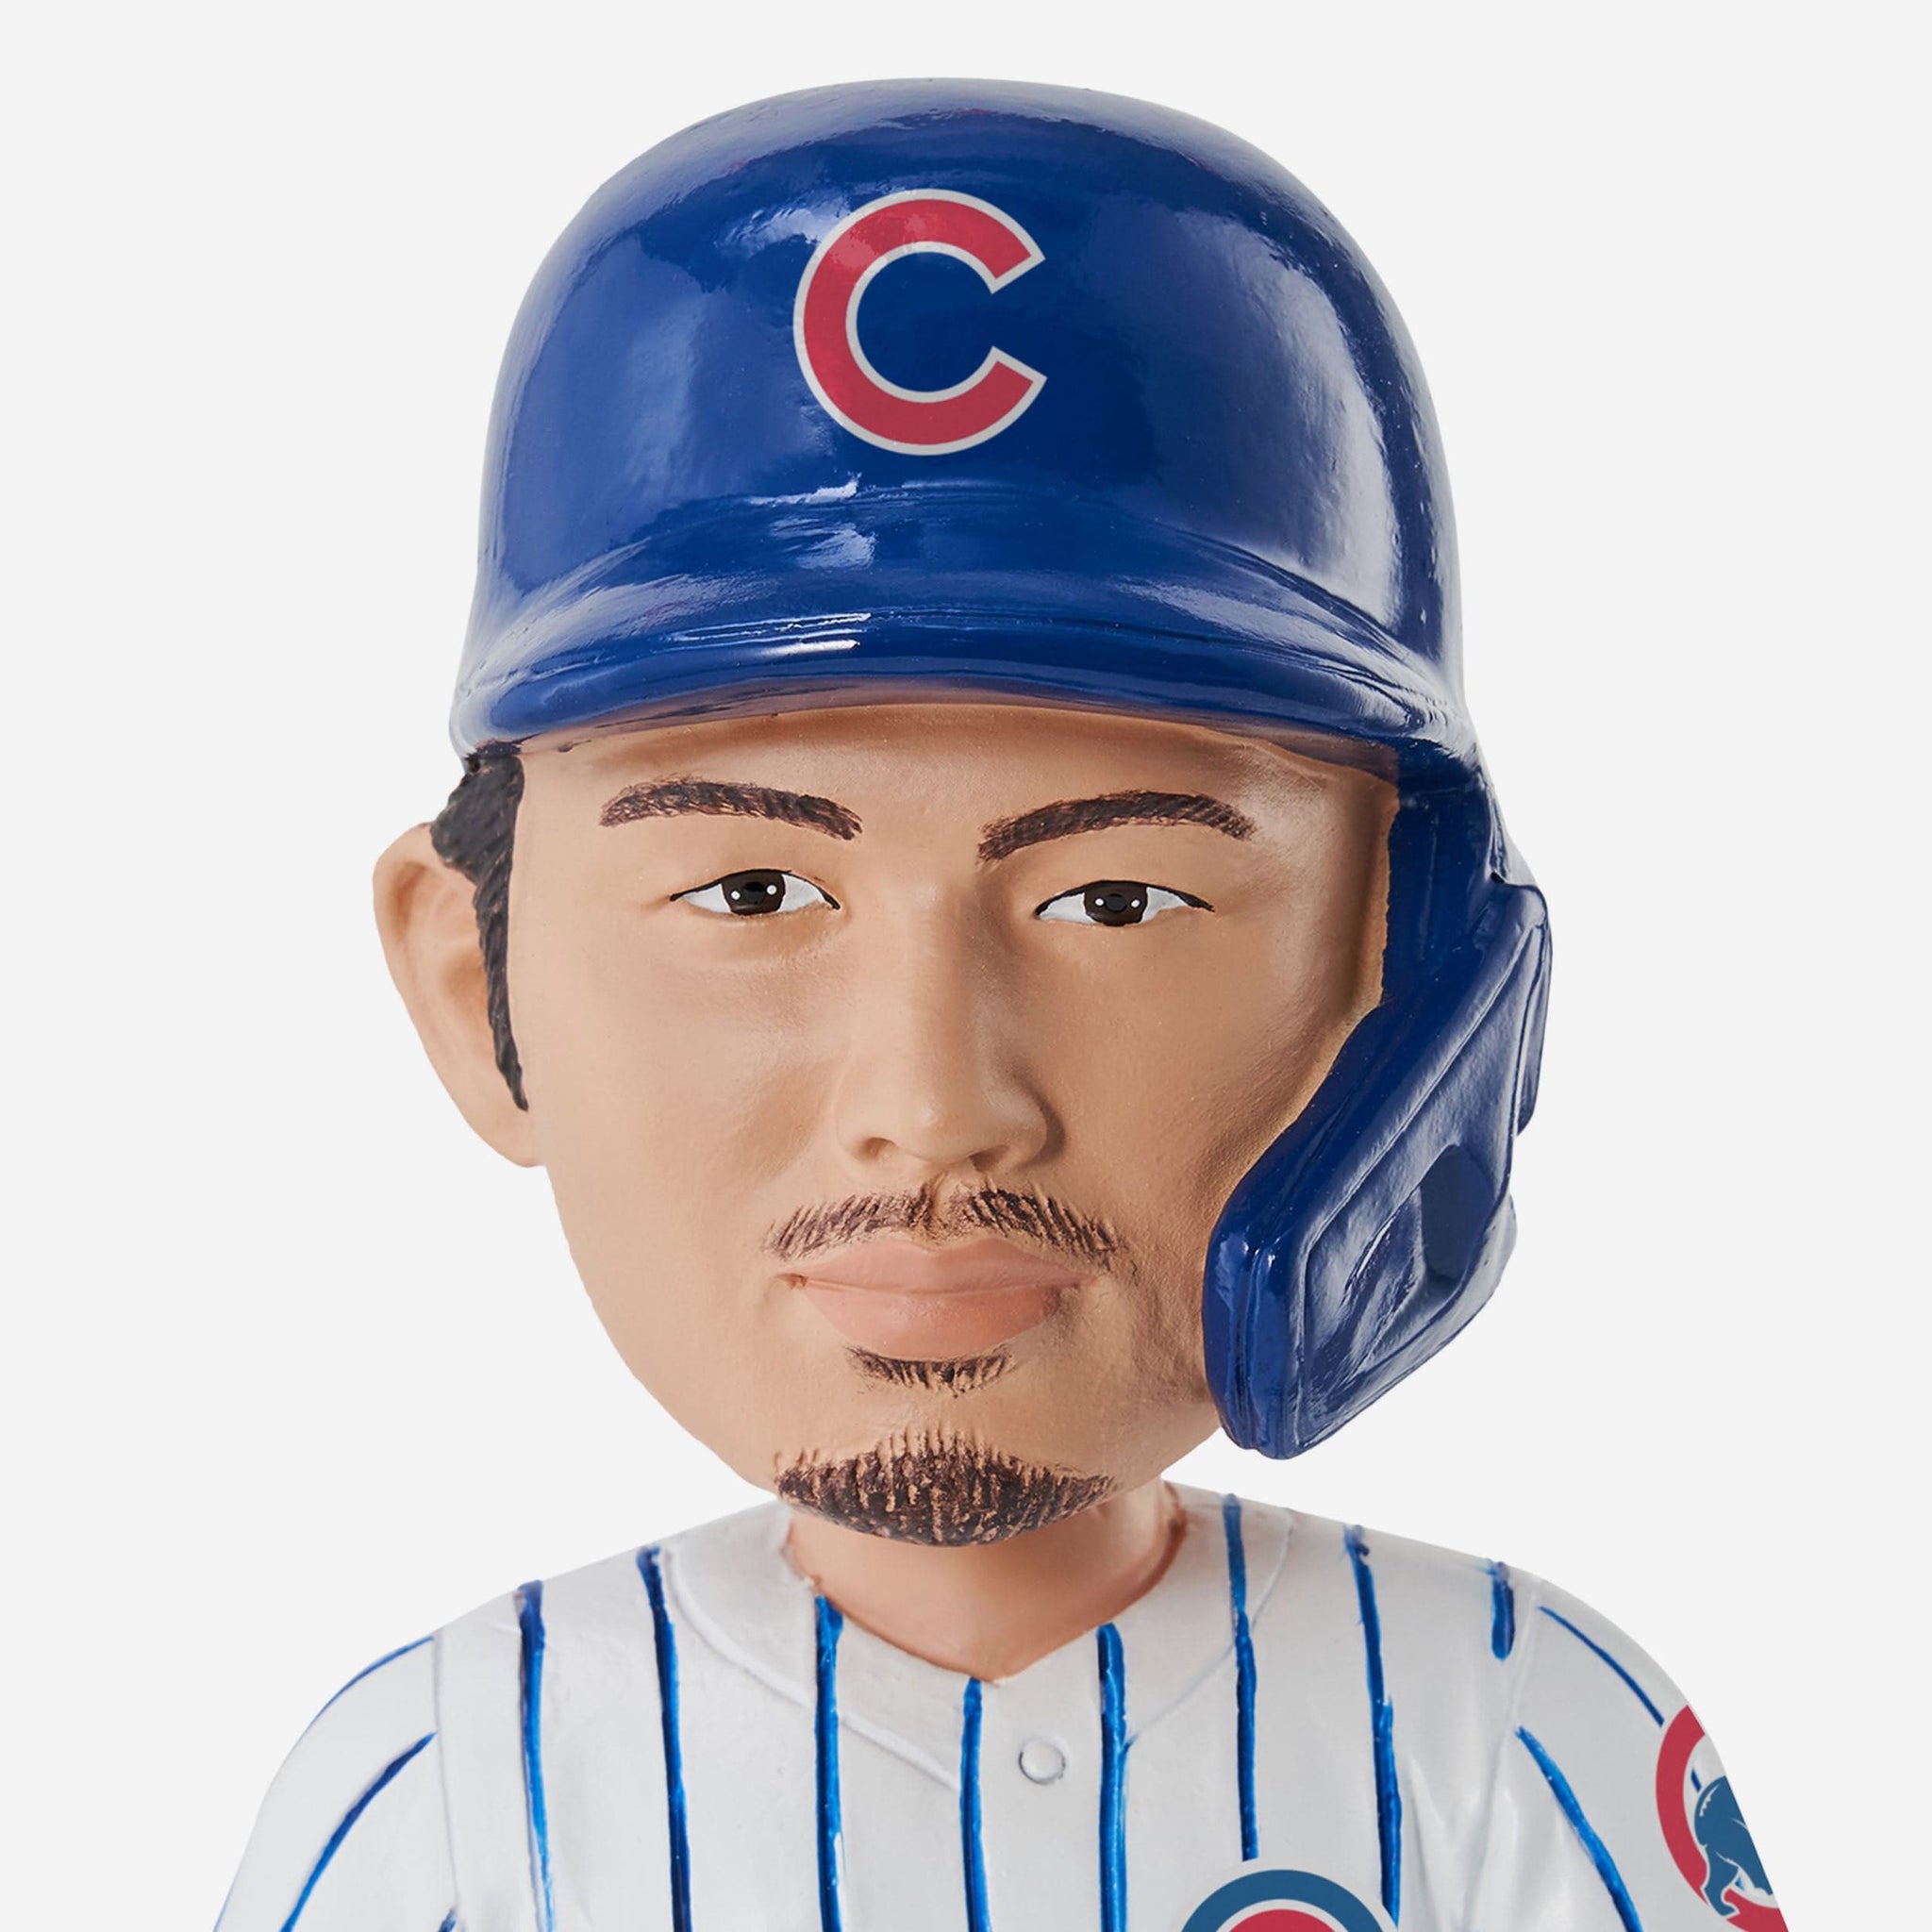 Clark Chicago Cubs 2023 MLB London Series Mascot Bobblehead Officially Licensed by MLB